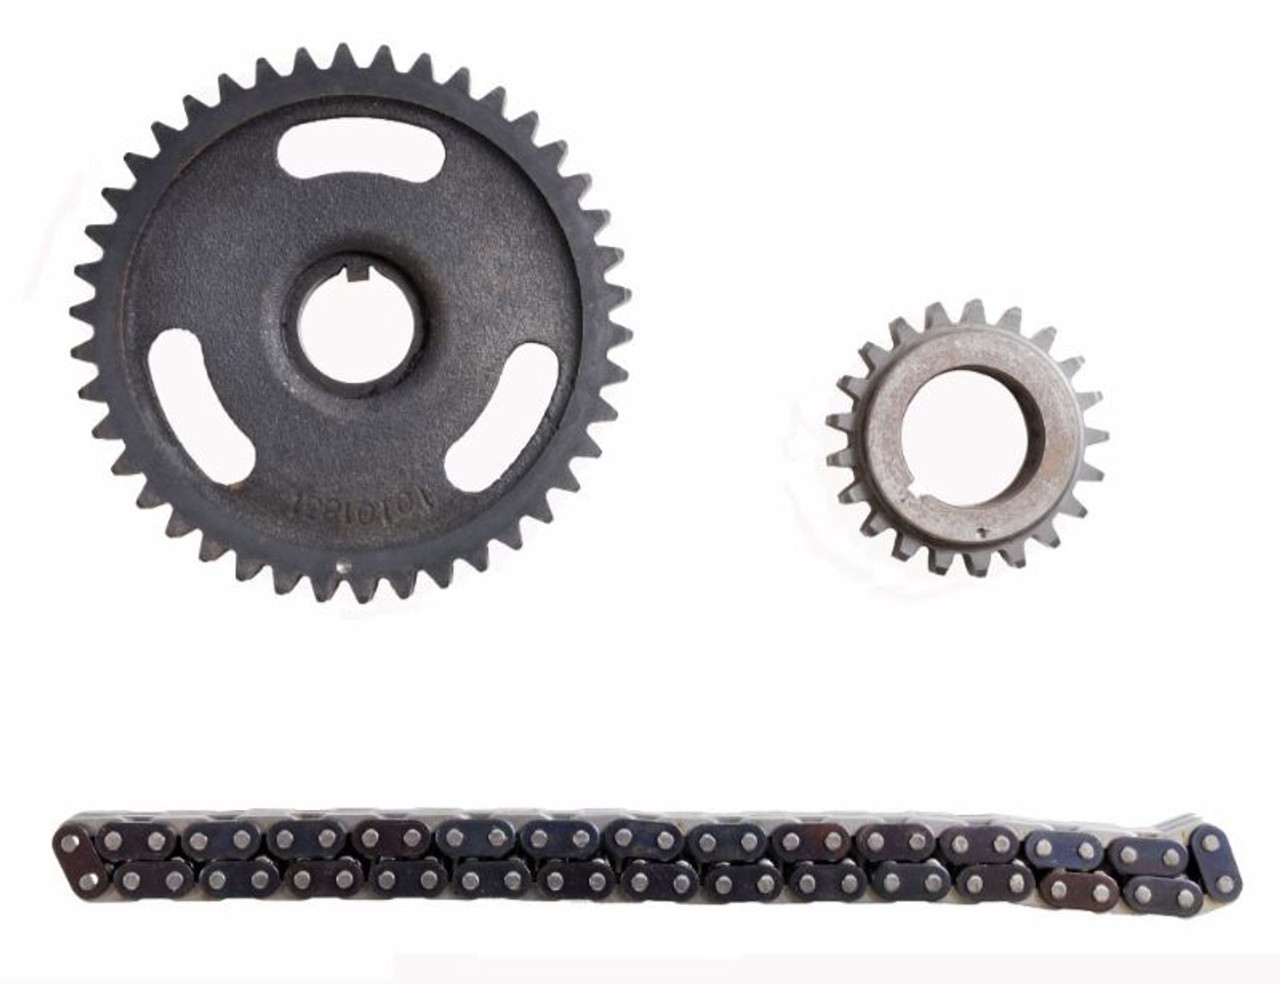 1992 Buick Century 2.5L Engine Timing Set TS378A -6